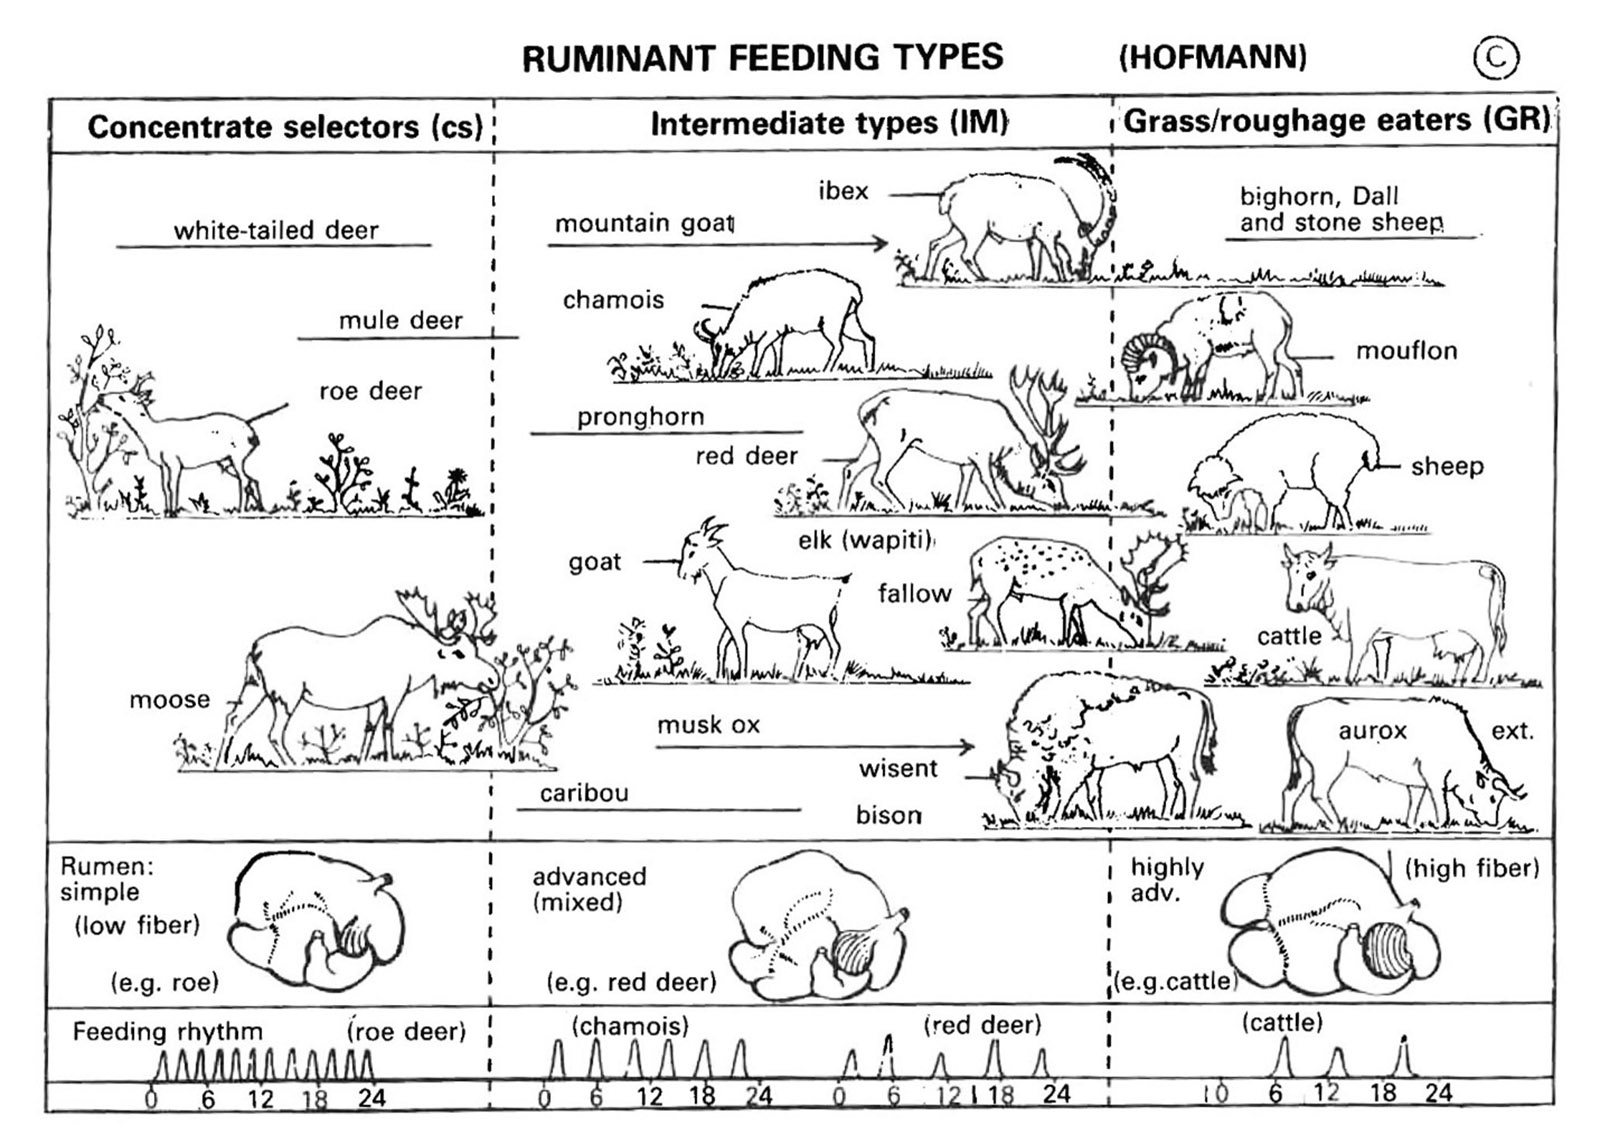 An chart of Ruminant feeding types; White tailed, mule, roe, and moose are concentrate selectors with a simple rumen. Ibex, mountain goat, pronghorn, elk, goat, fallow, musk ox, caribou, wisent and bison have an advanced mixed rumen and are intermediate types. And finally mouflon, sheep, and cattle have highly advanced rumen and are roughage eaters that consume primarily grass.